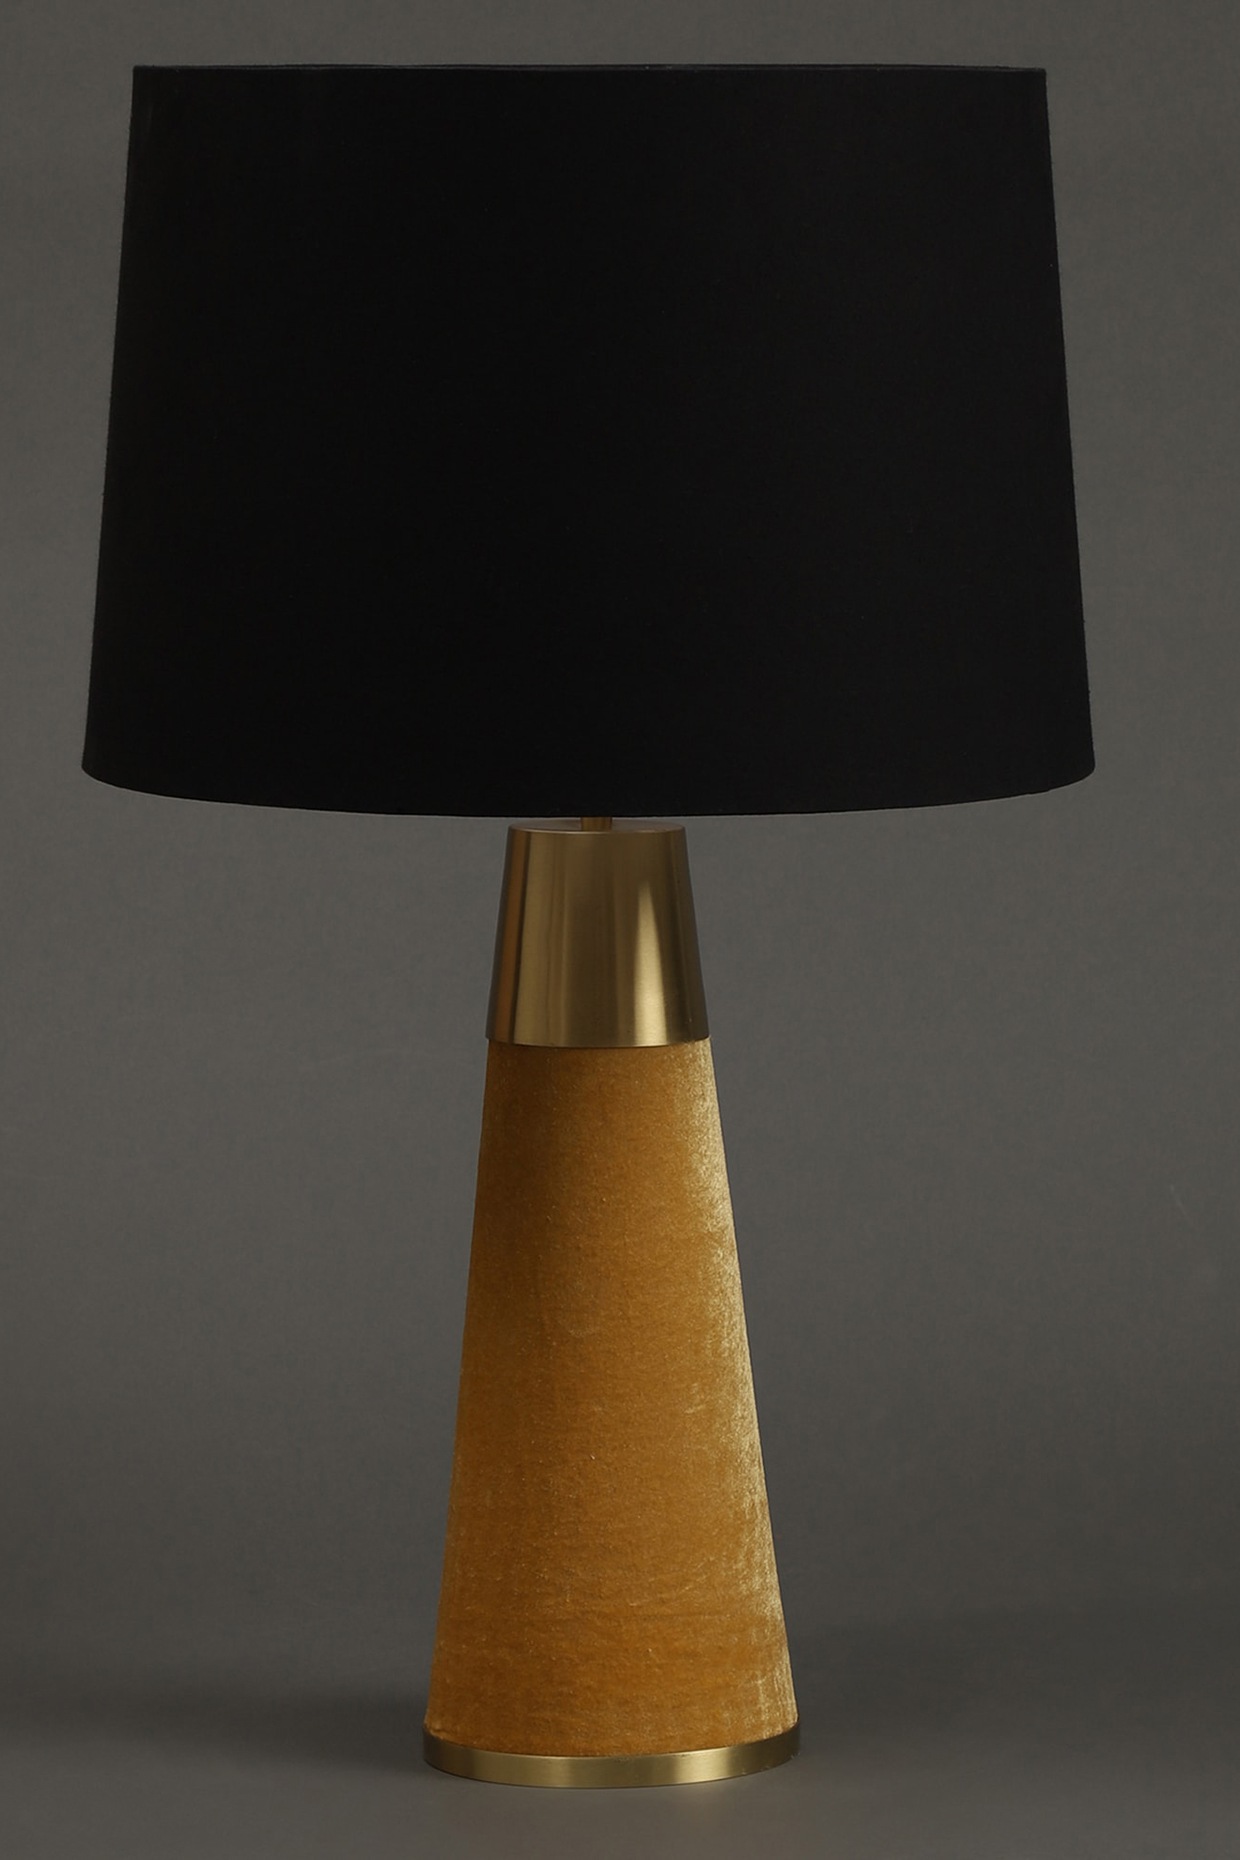 Yellow Table Lamp With Velvet Shade, Secure Lamp To Table